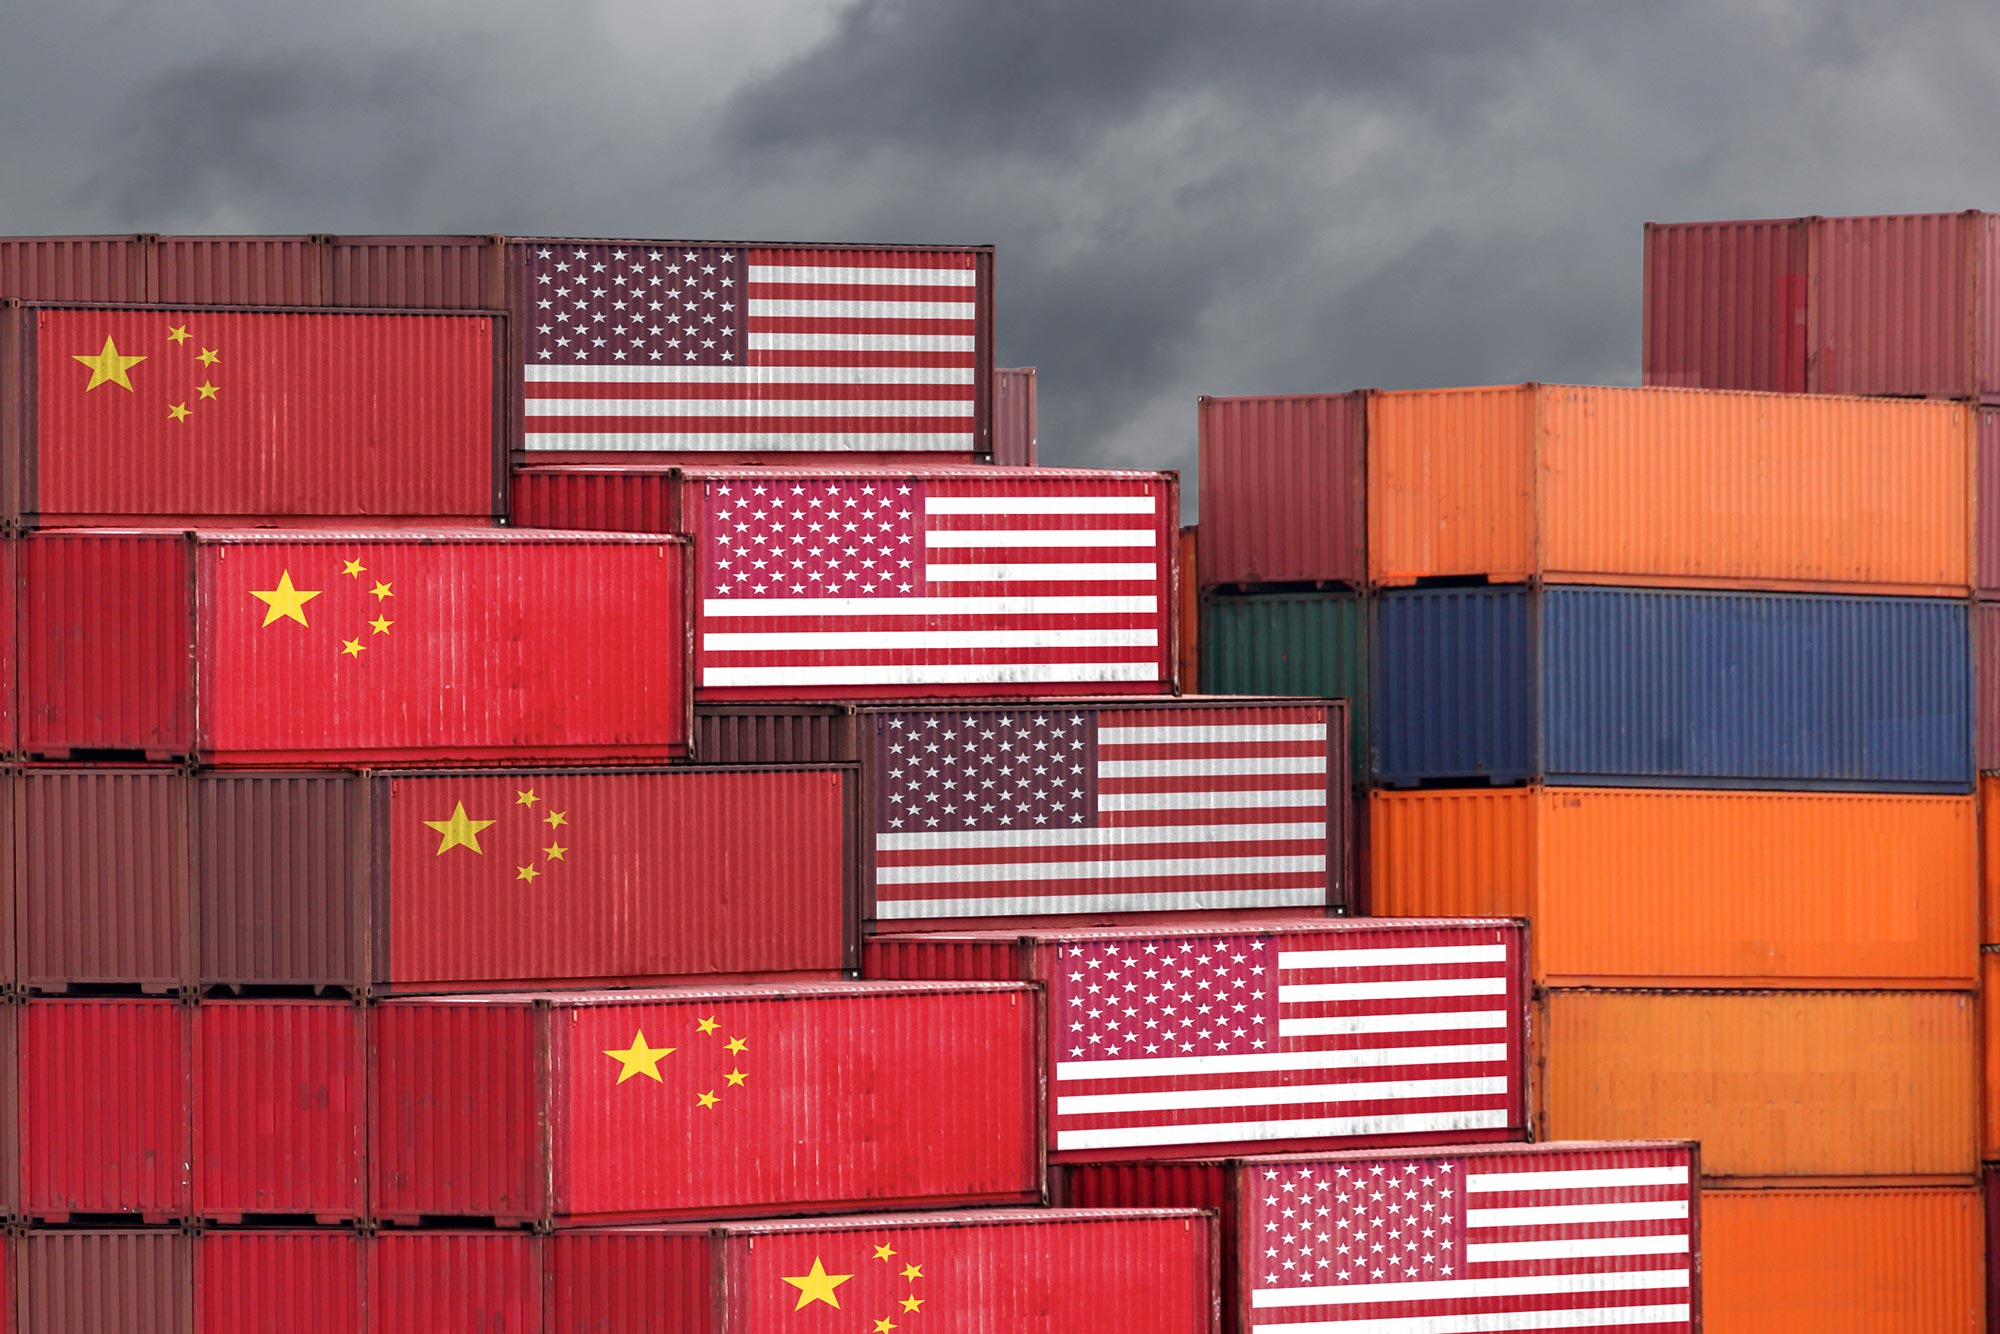 Illustrative photograph of the China USA trade war represented by cargo shipping containers painted with the American and Chinese flag stacked up near one another.